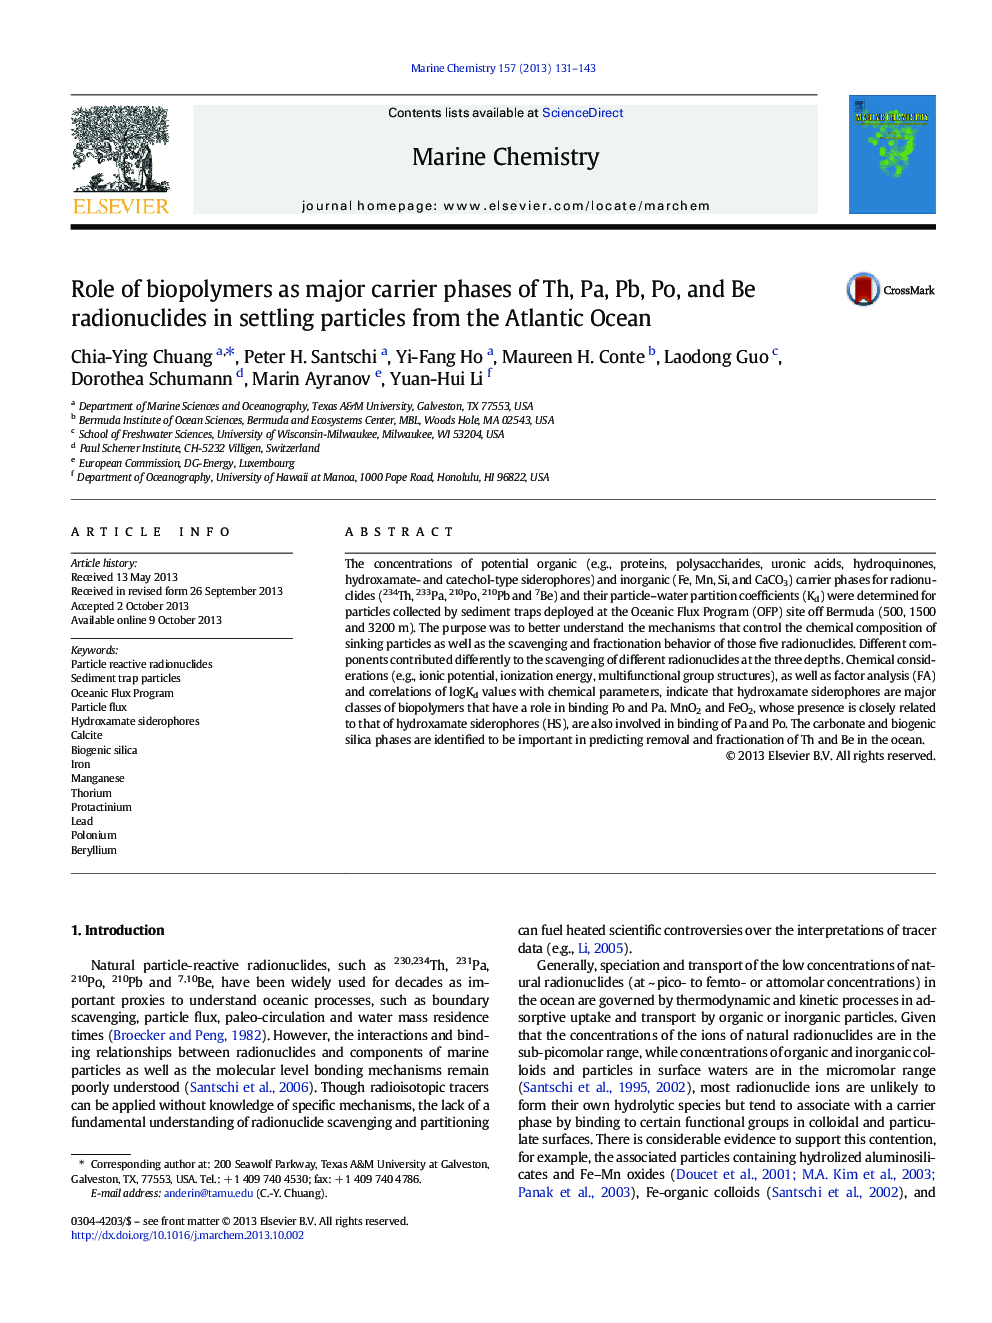 Role of biopolymers as major carrier phases of Th, Pa, Pb, Po, and Be radionuclides in settling particles from the Atlantic Ocean